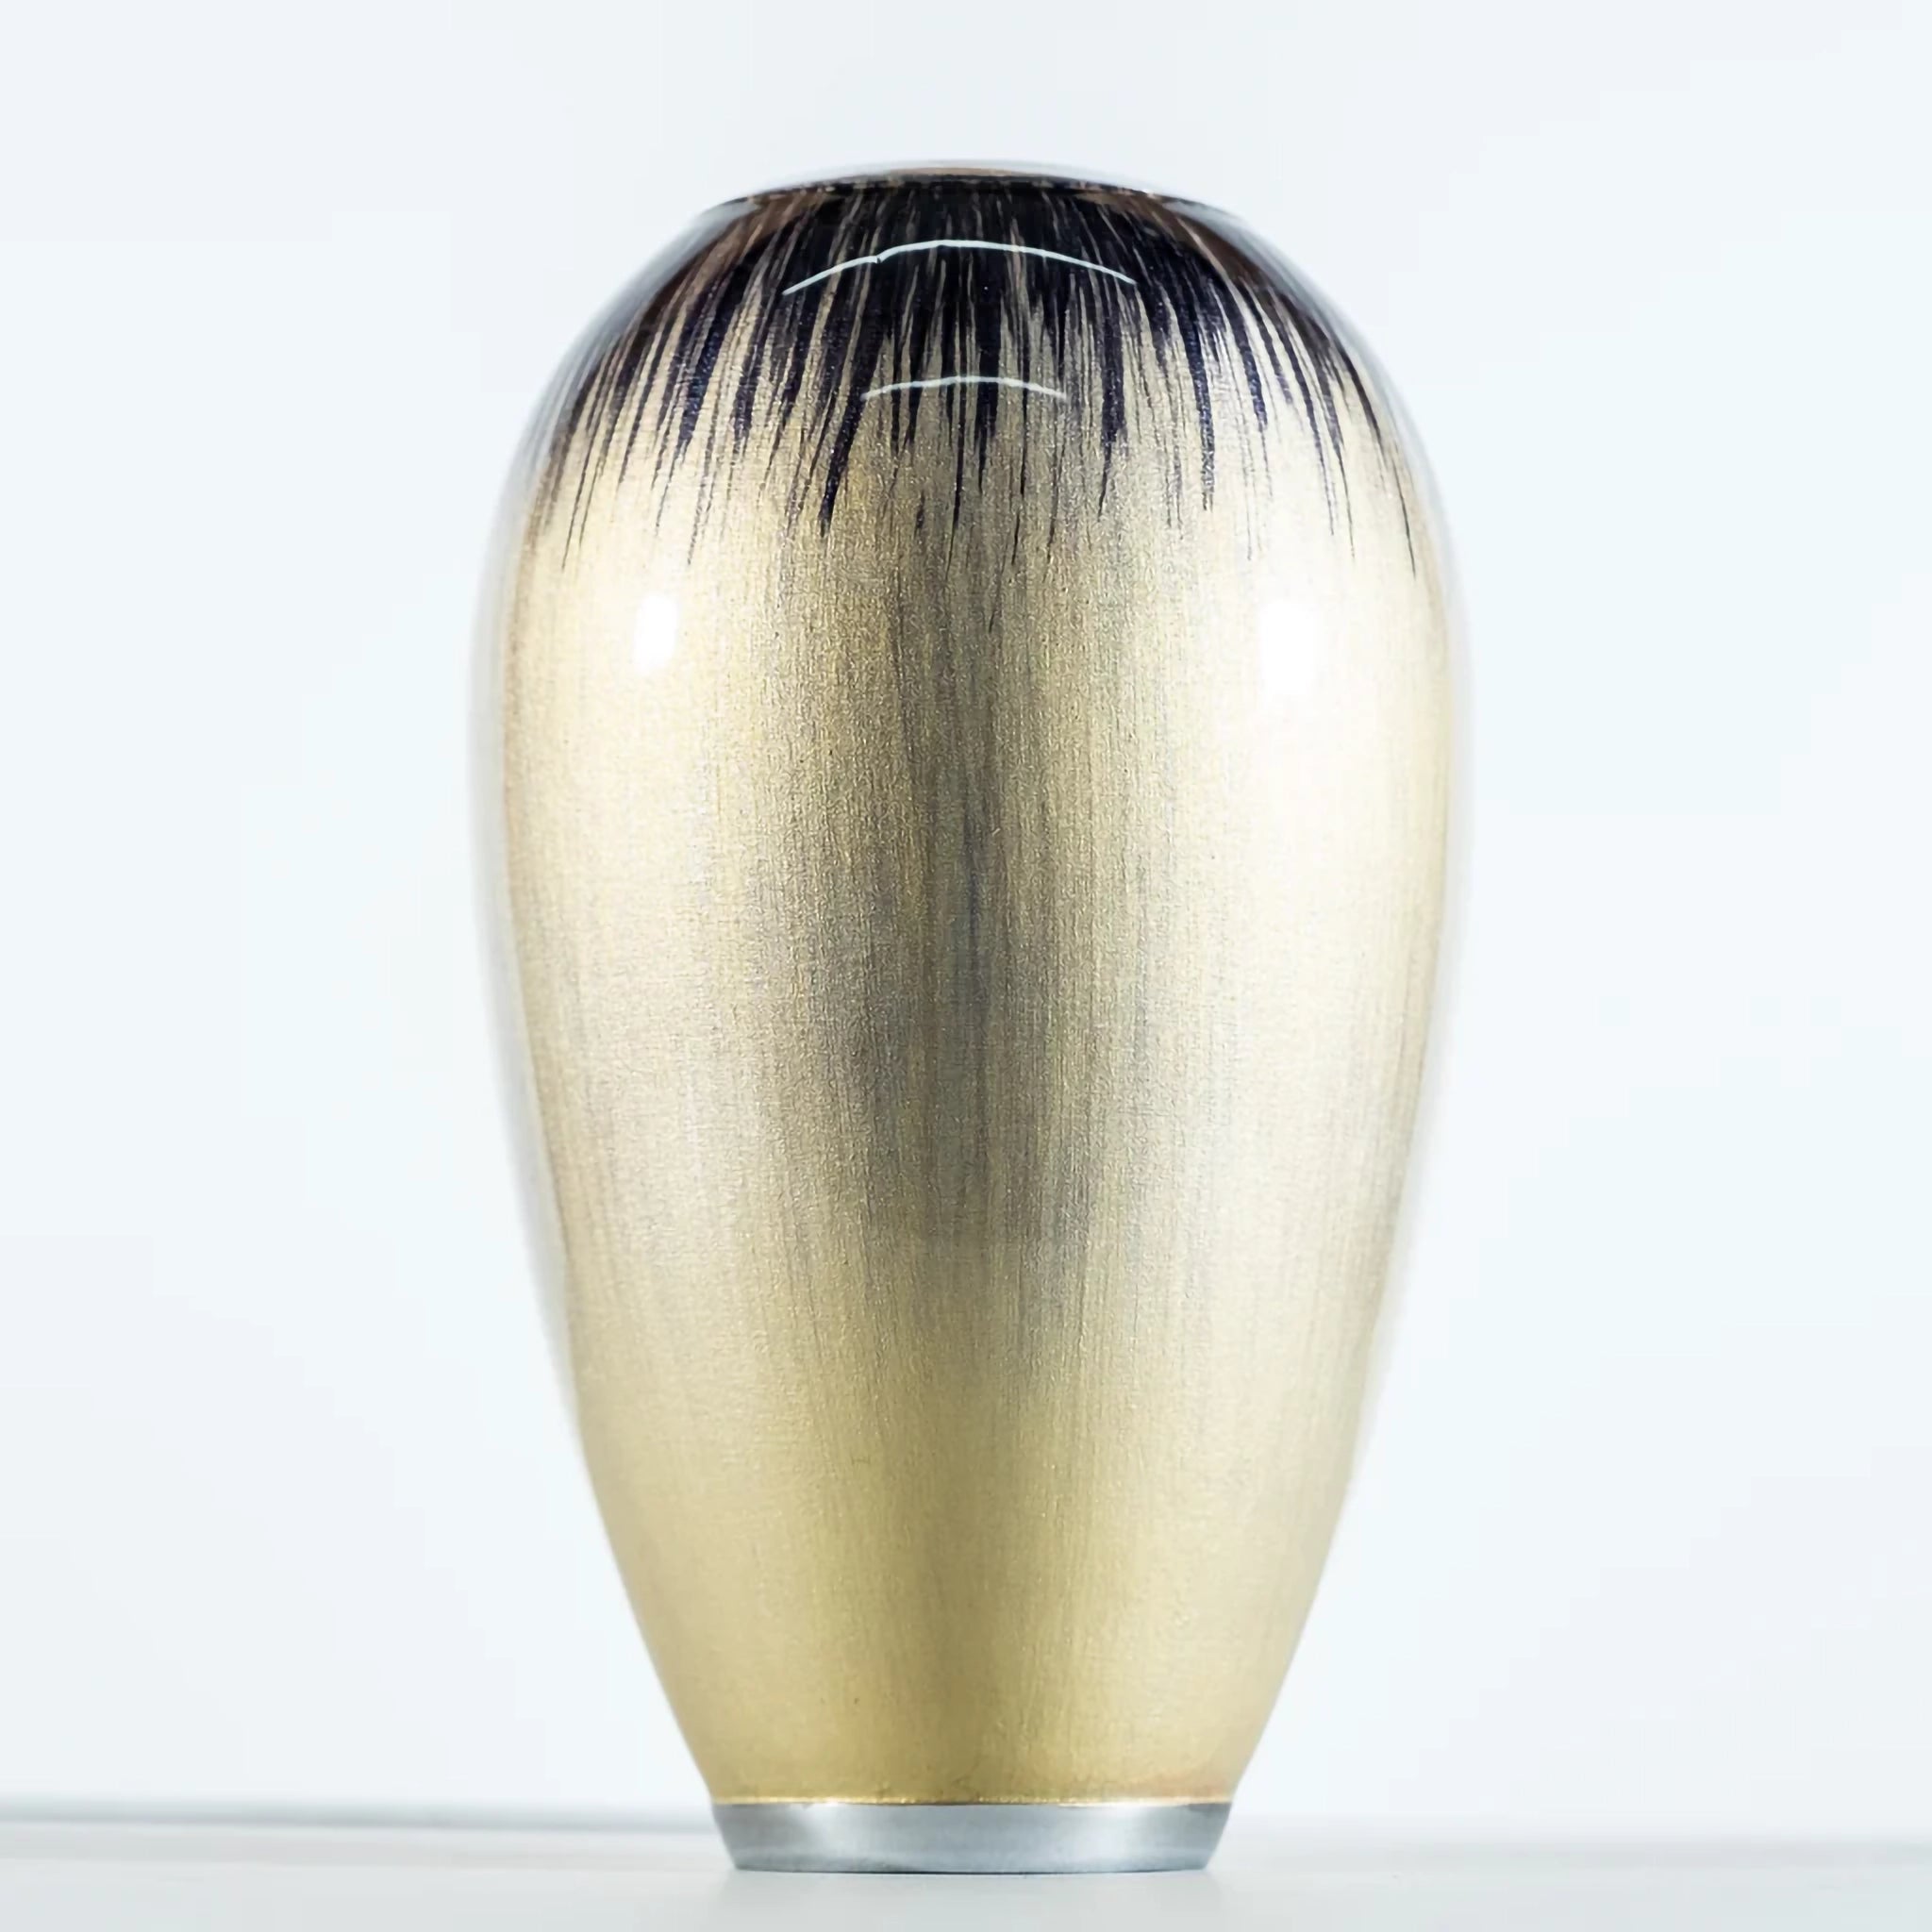 A rounded vase in ombre silver enamel